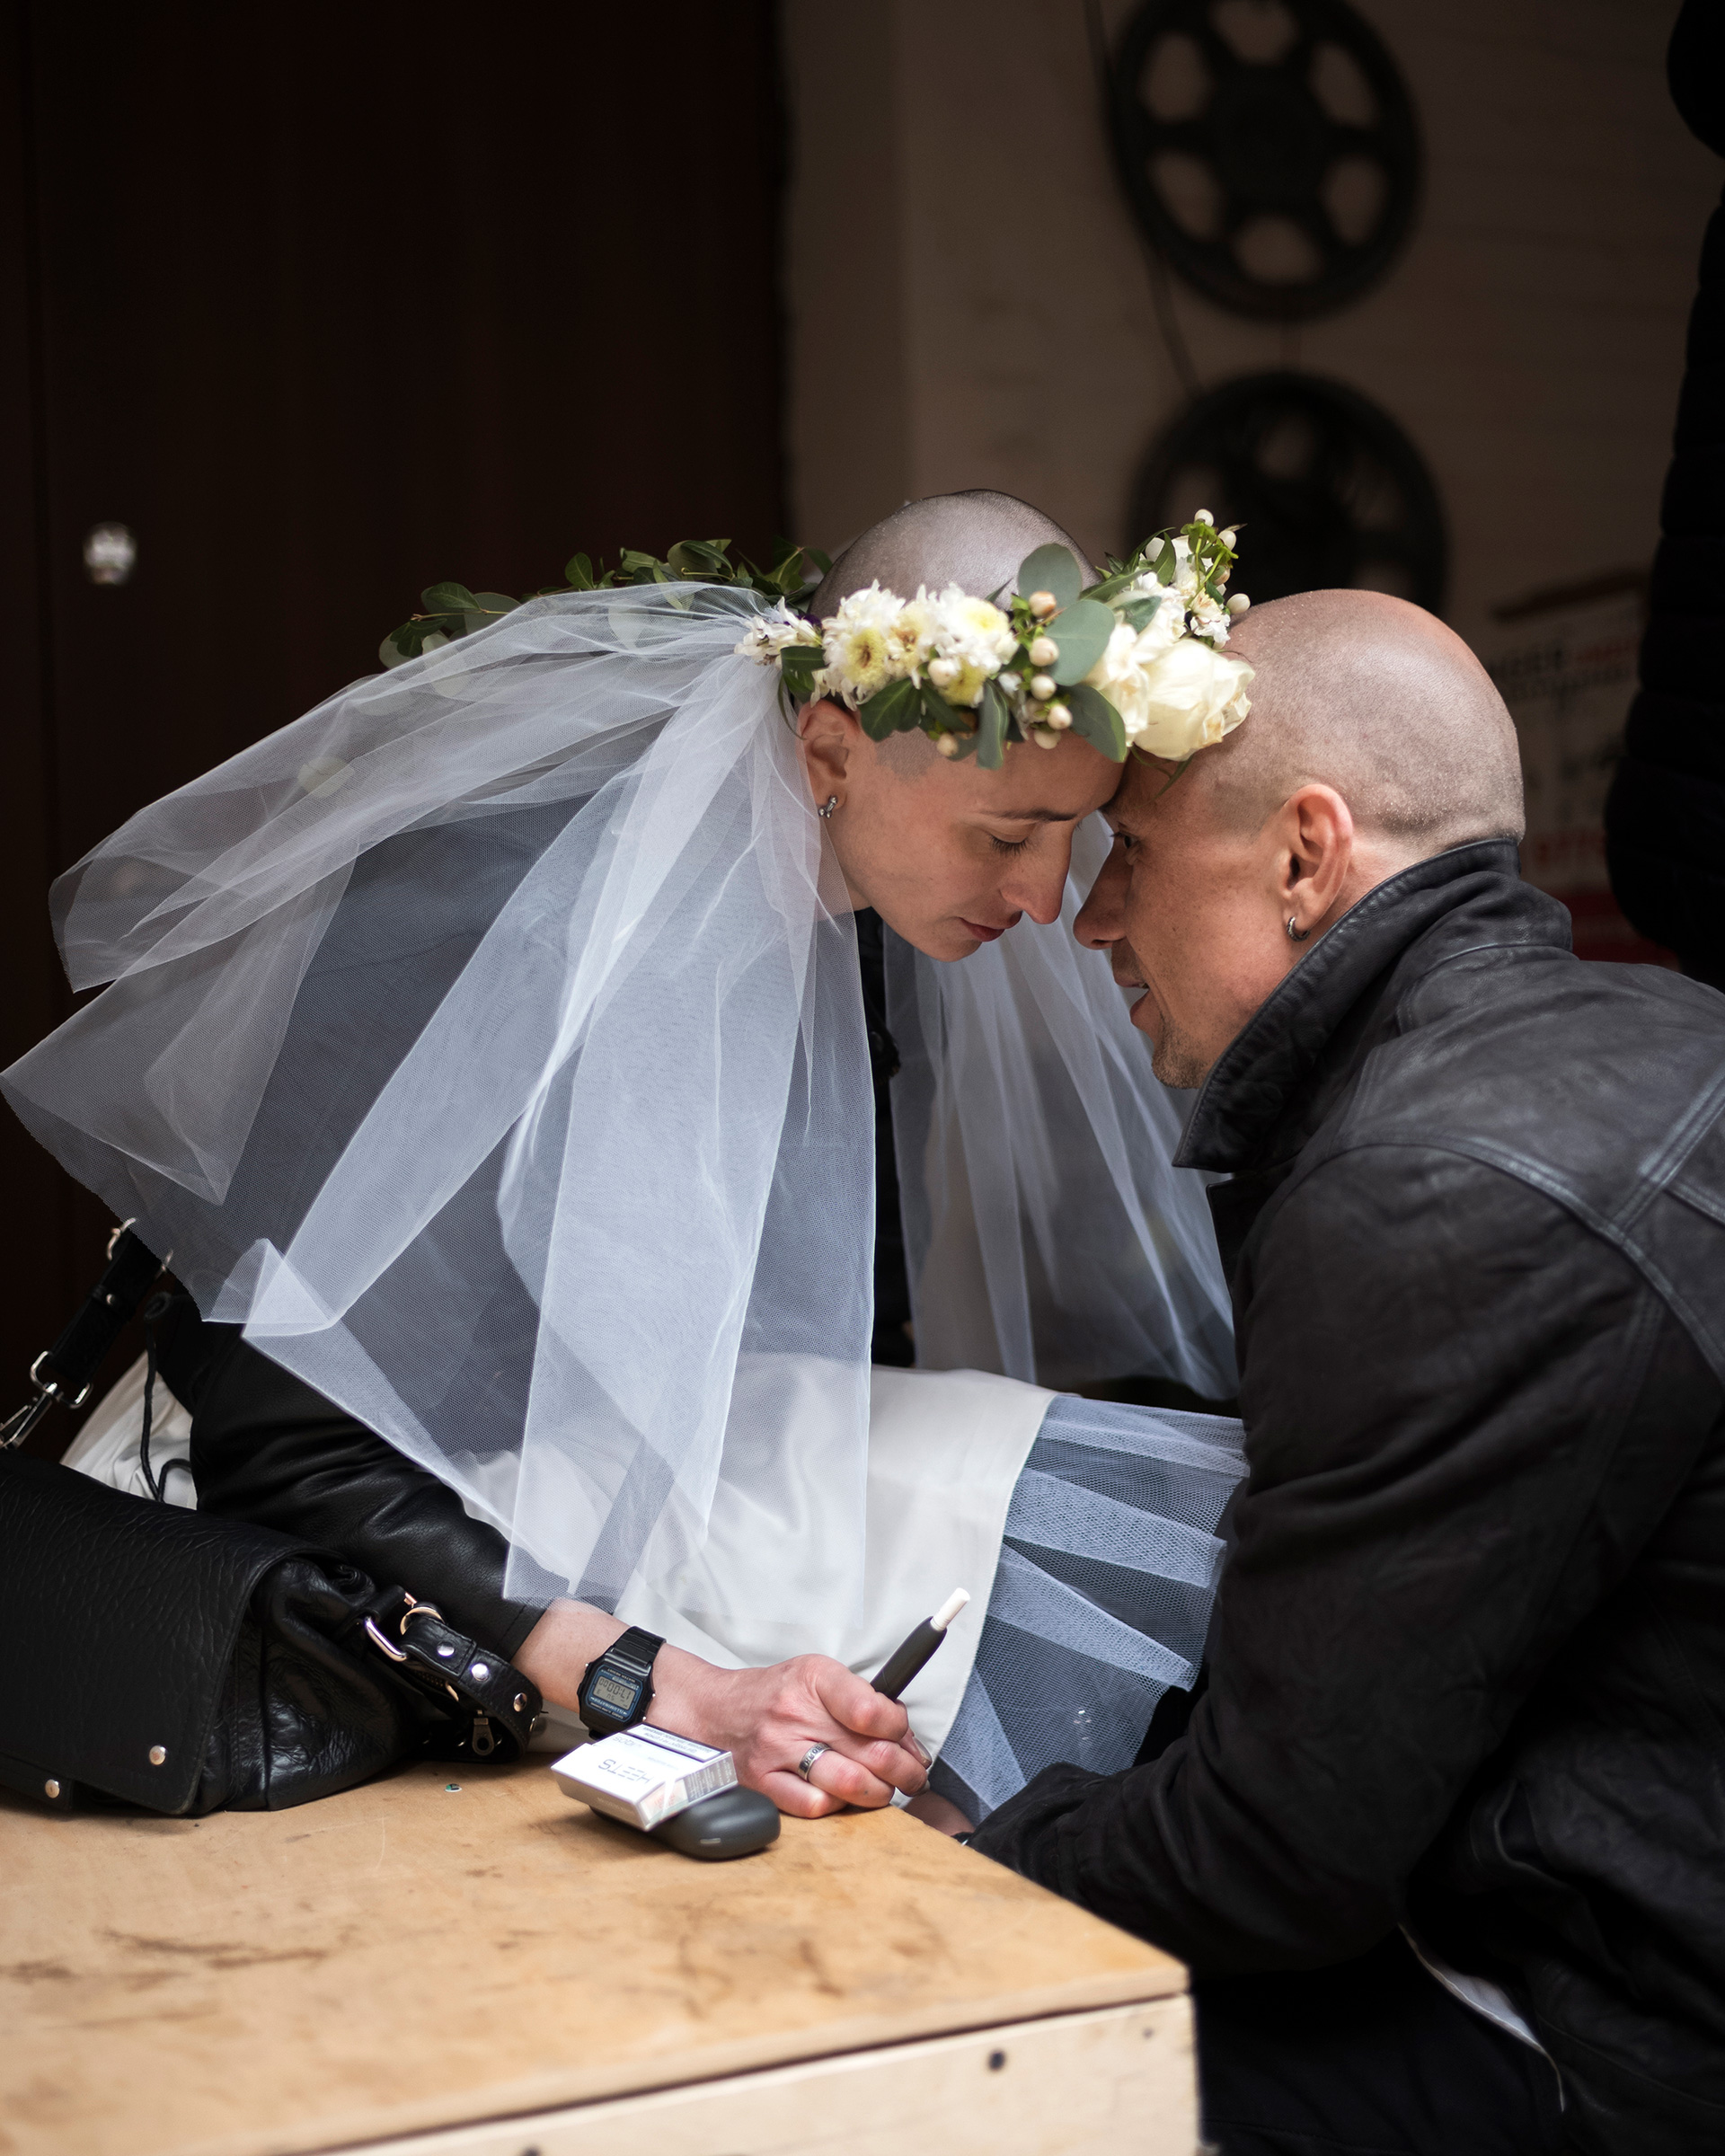 Volunteer doctors Anastsia Hraczow and Anton Sokolow marry in Kharkiv, Ukraine on April 3, 2022. During the reception, Ukrainian poet Serhiy Zhadan described the couple as "strong and brave young people whose love resist the dark reality around."